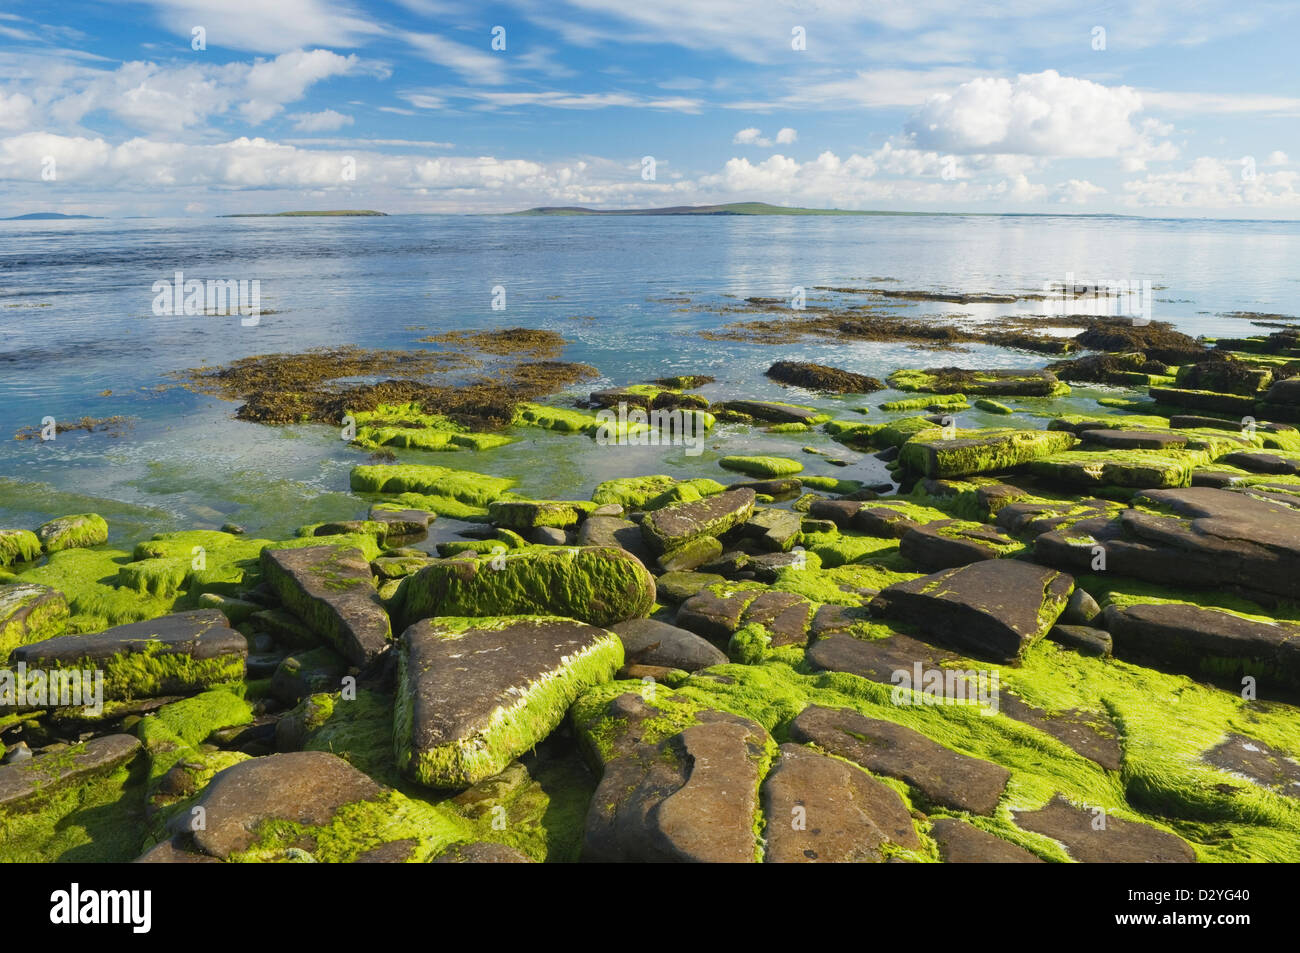 Coast near the northern tip of the island of Shapinsay, Orkney Islands, Scotland. Stock Photo